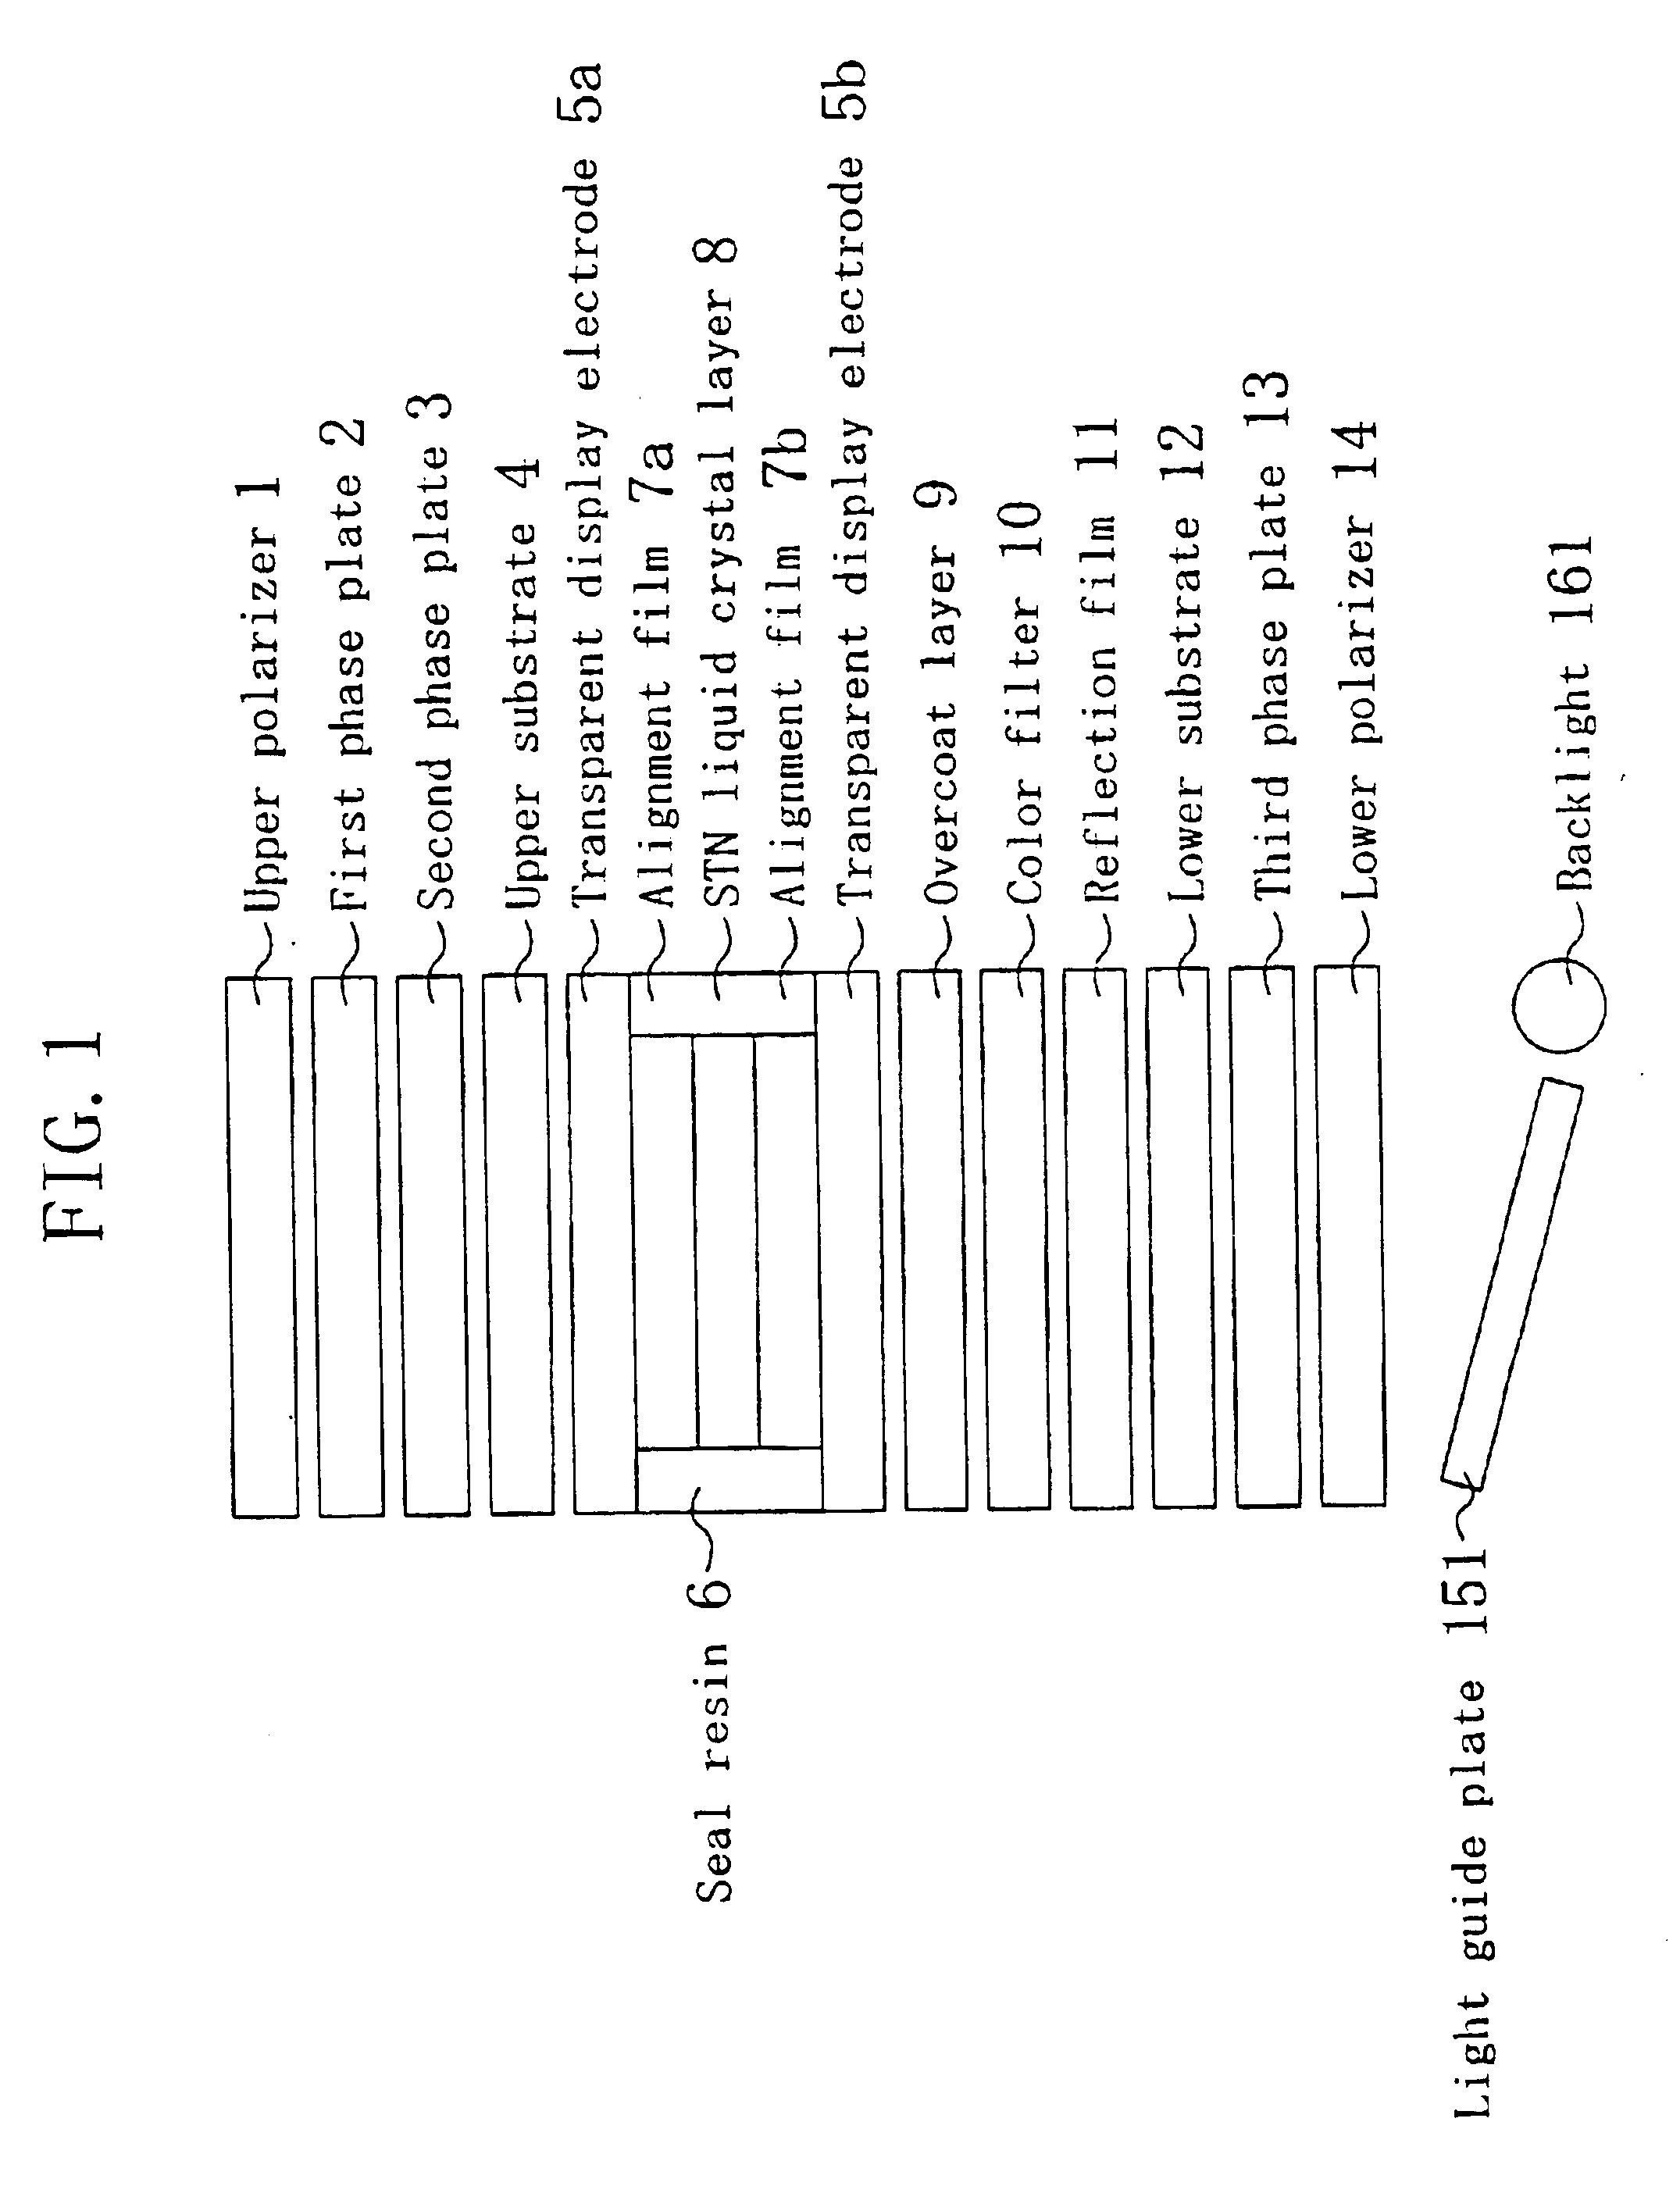 Transmission/reflection type color liquid crystal display device